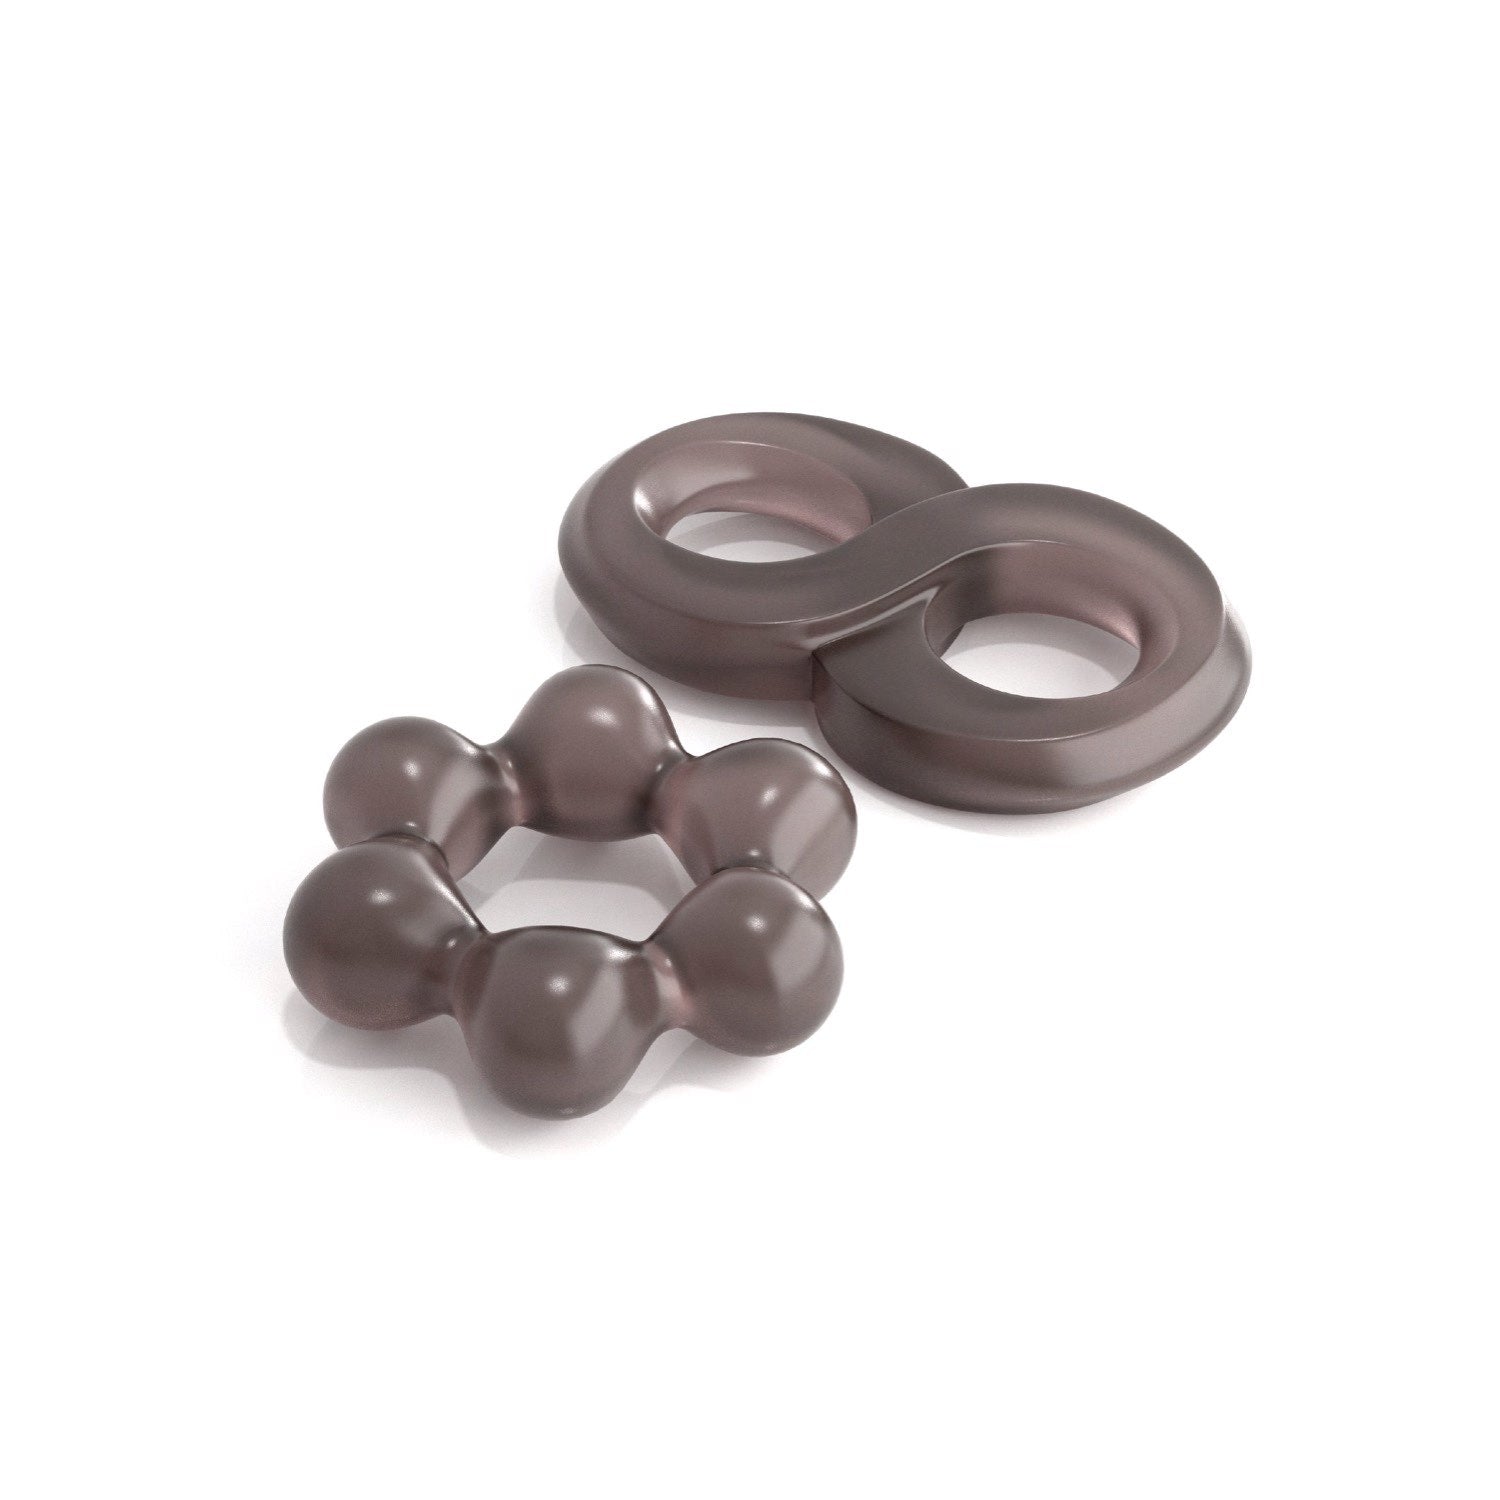 Classix Performance Cock Ring Set - Smoke Cock Rings - Set of 2 by Pipedream